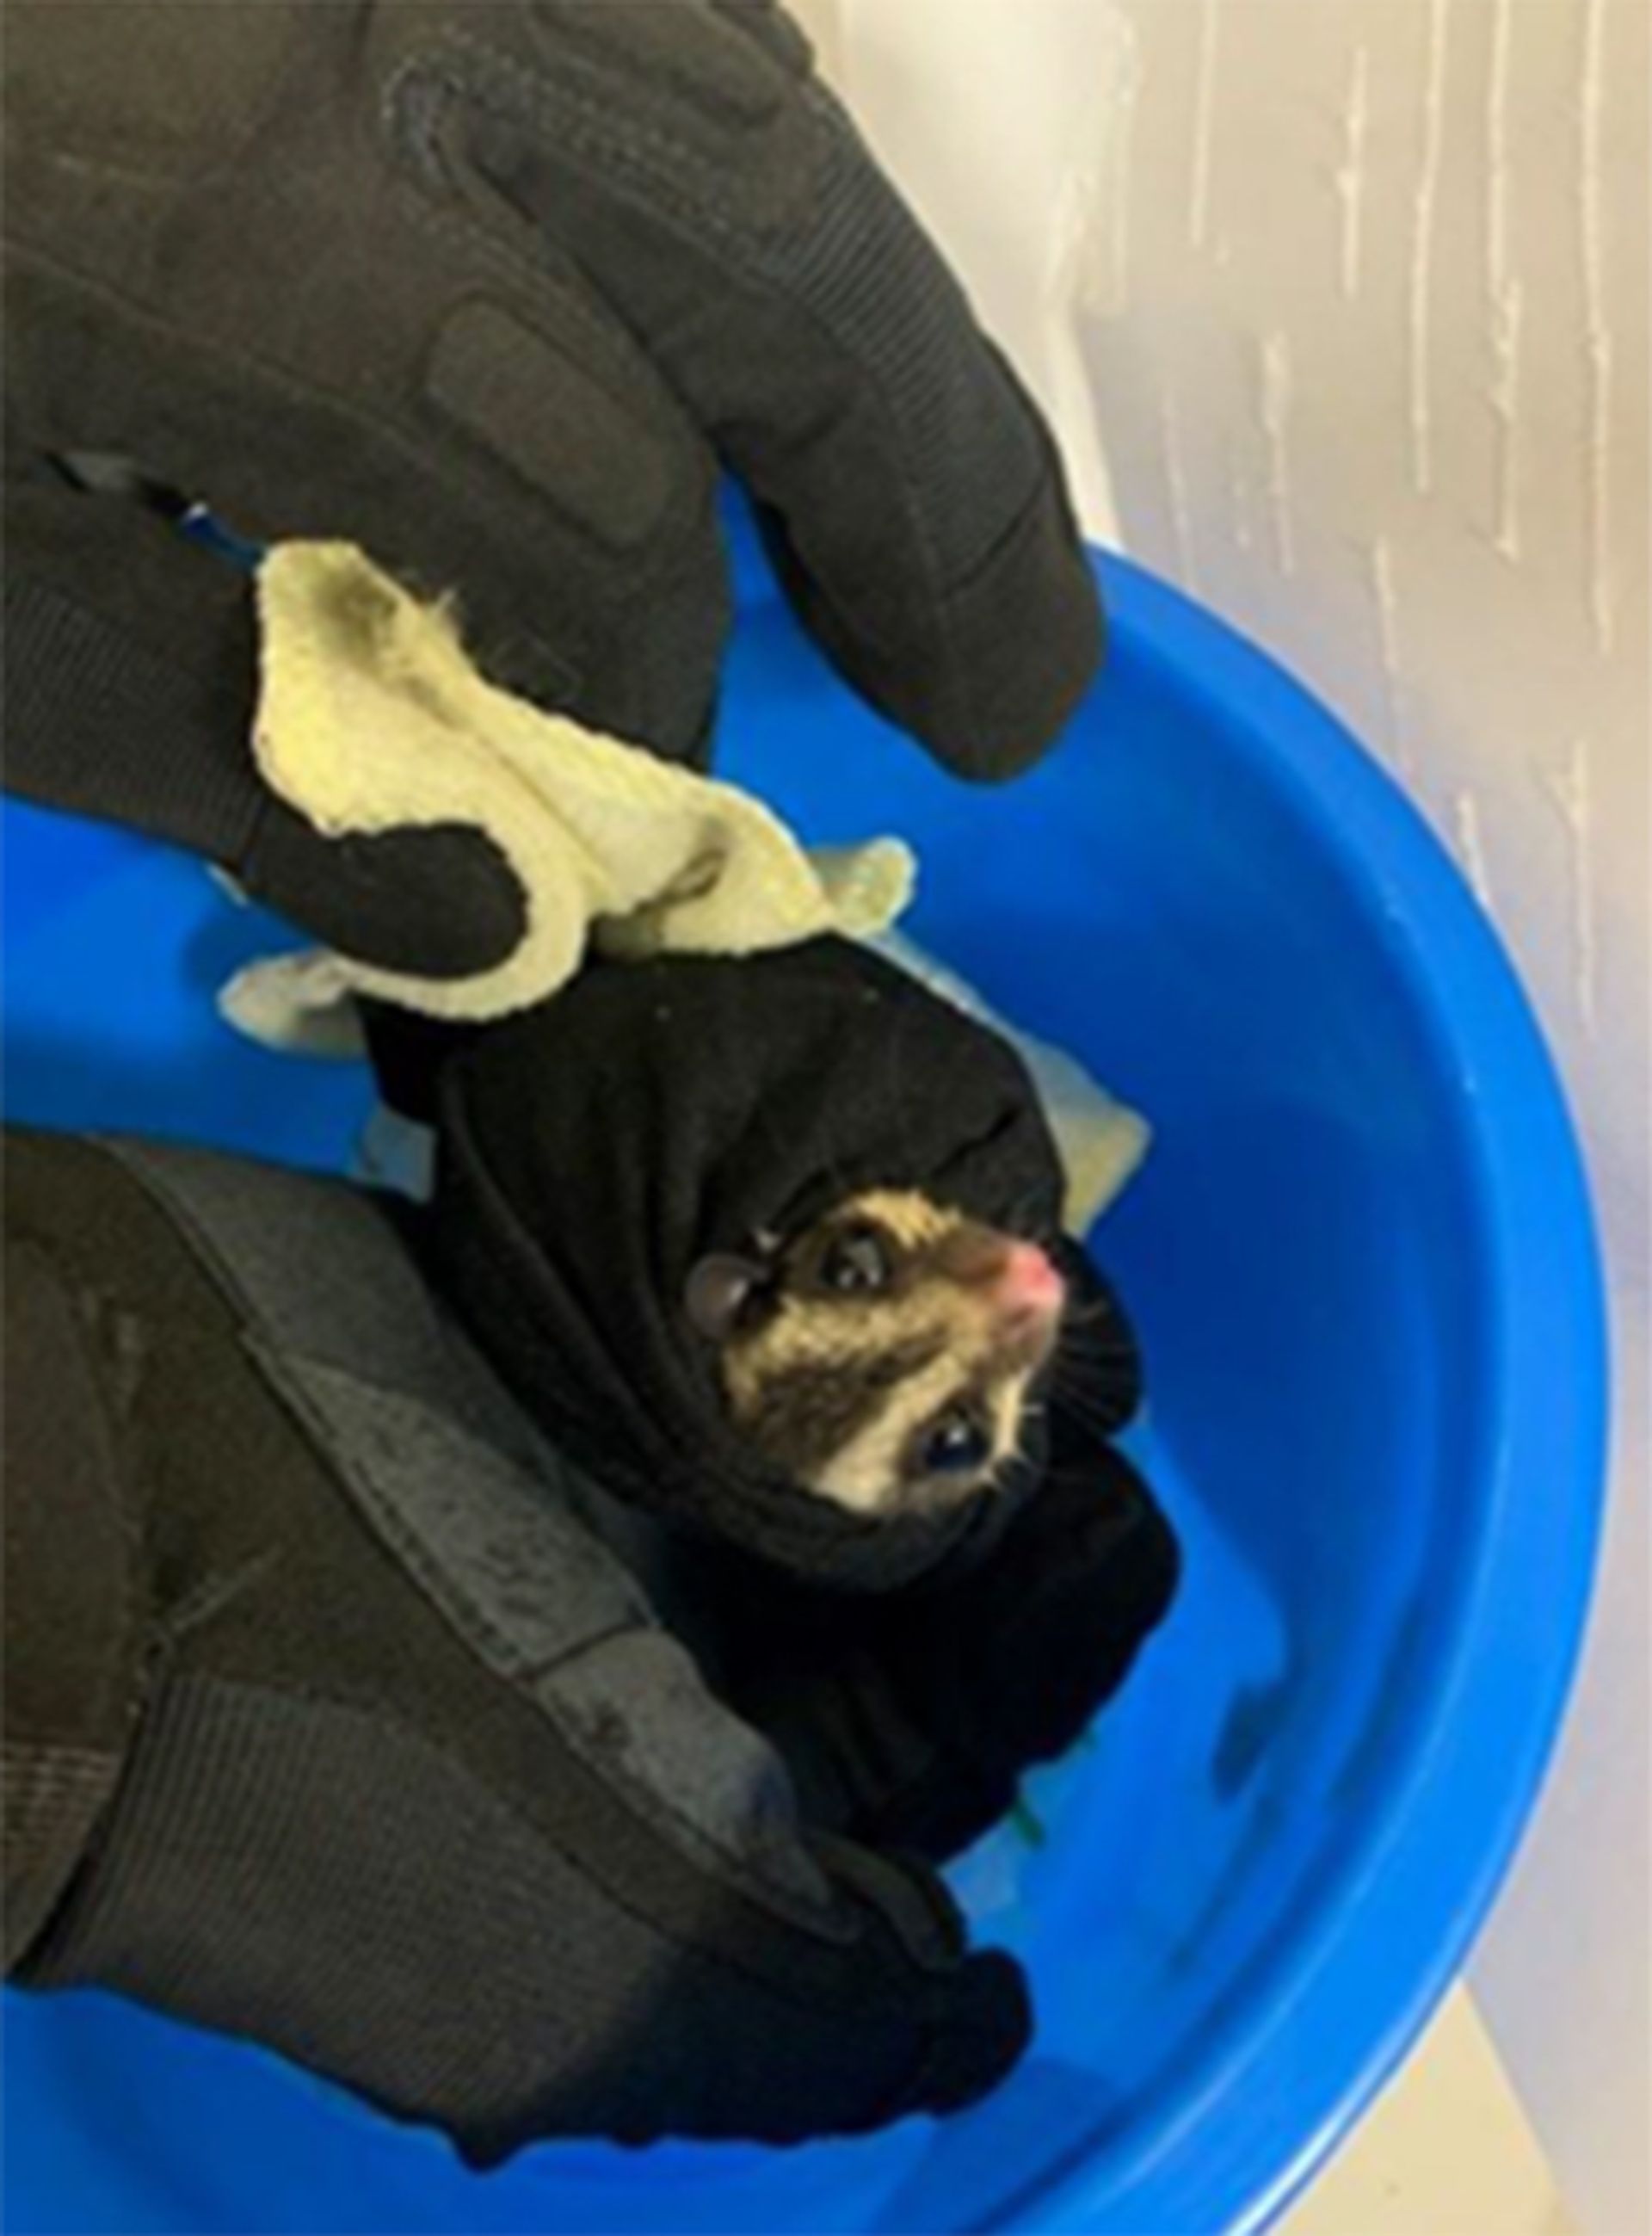 A sugar glider was found concealed in a pail in the boot of a vehicle in December 2022. PHOTO: NPARKS